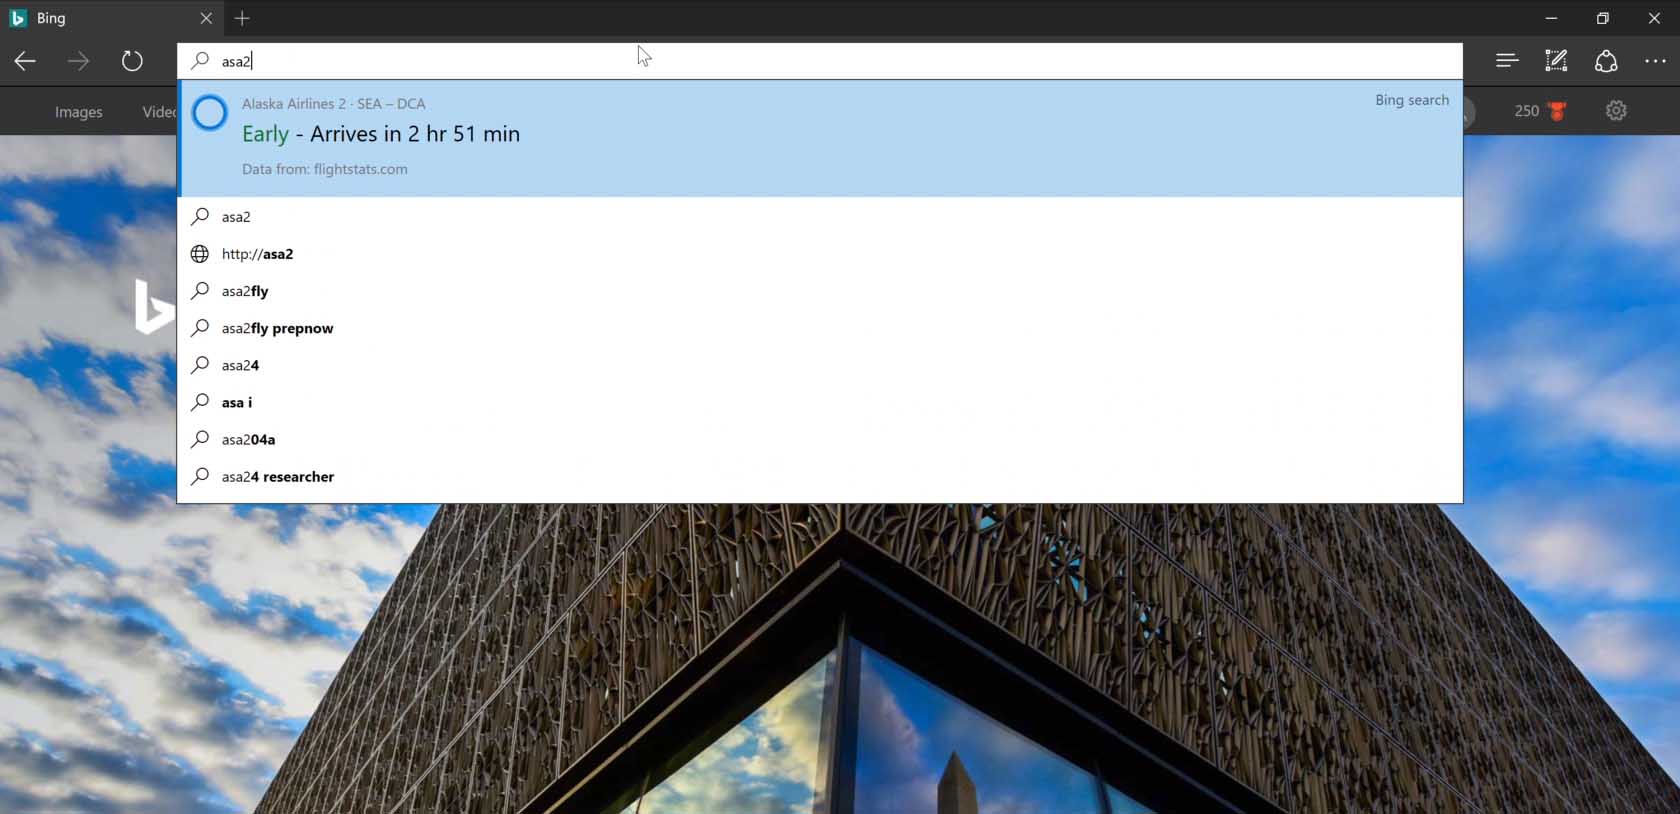 Windows 10 Tip: Get instant answers as you search with Microsoft Edge